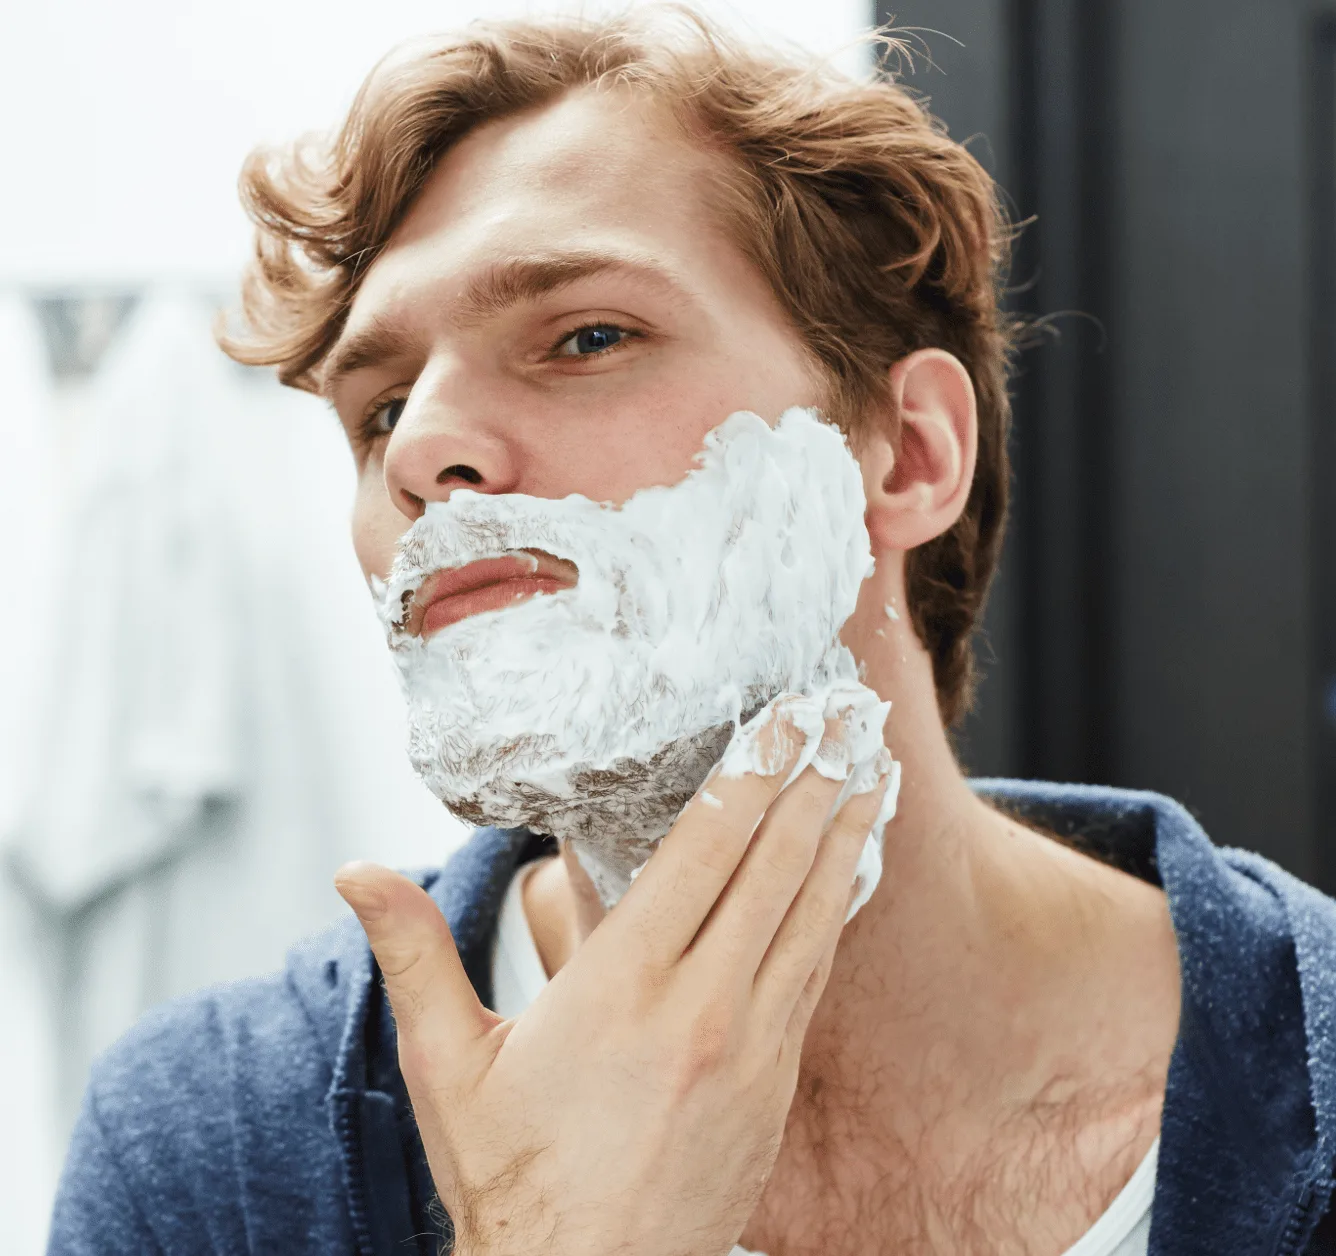 Smooth and comfortable shave